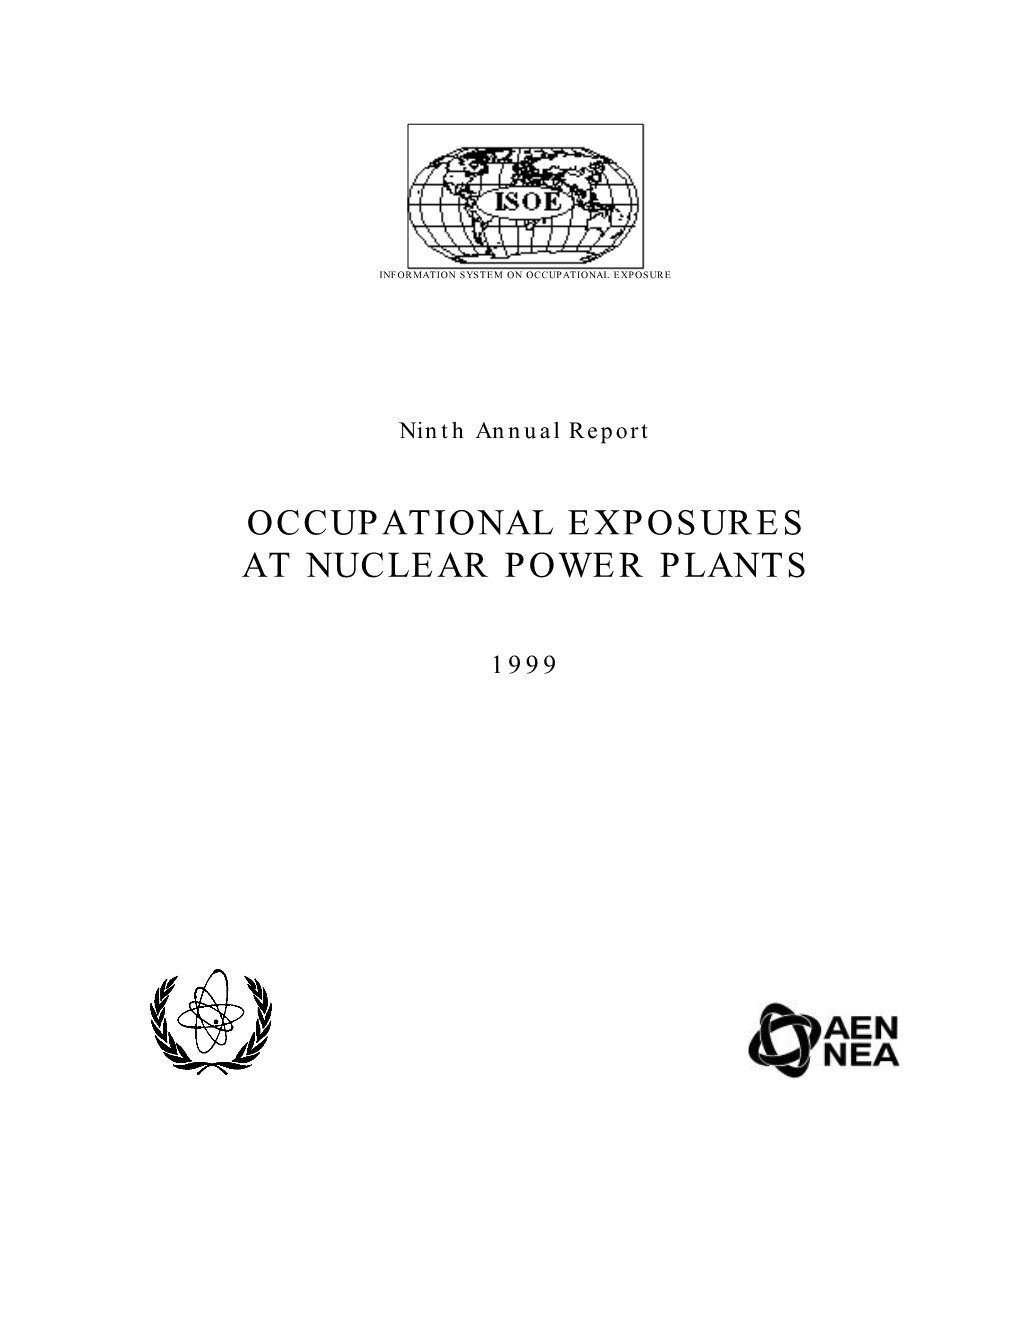 Occupational Exposure at Nuclear Power Plants in Tarragona Spain in April 2000